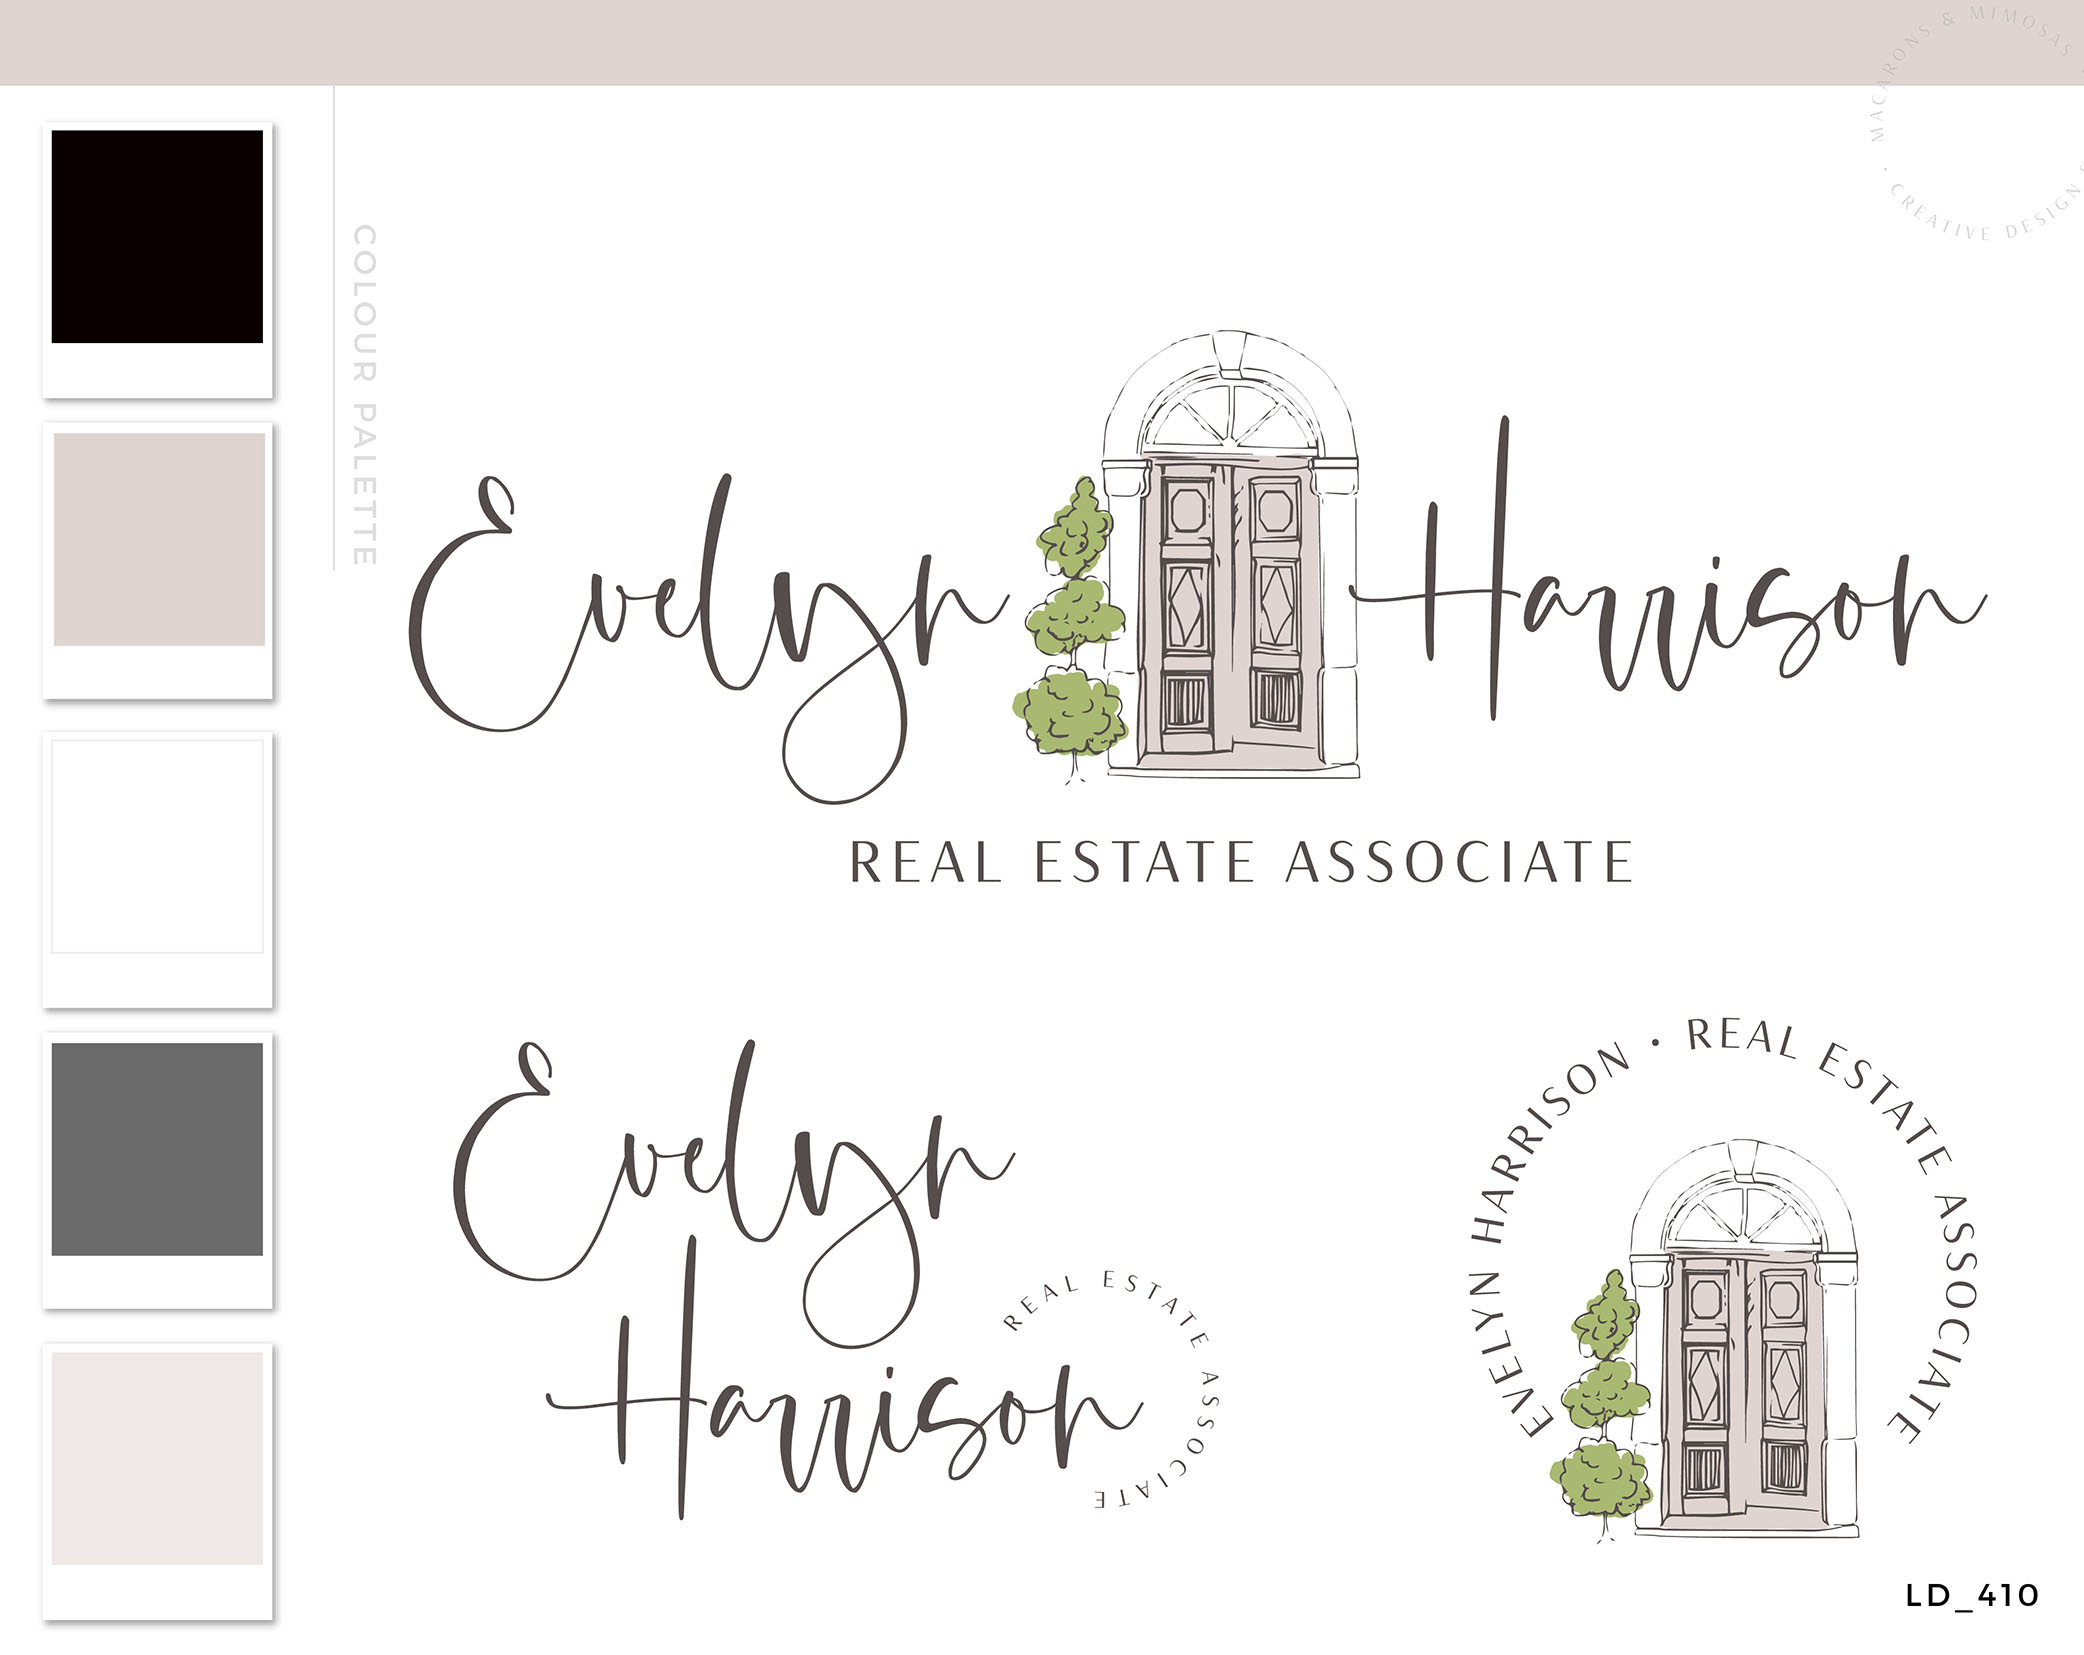 Real Estate Door Logo Template, Real Estate Logo, Realtor Logo, House logo watermark, Realtor Marketing Package for Brokers and Associates